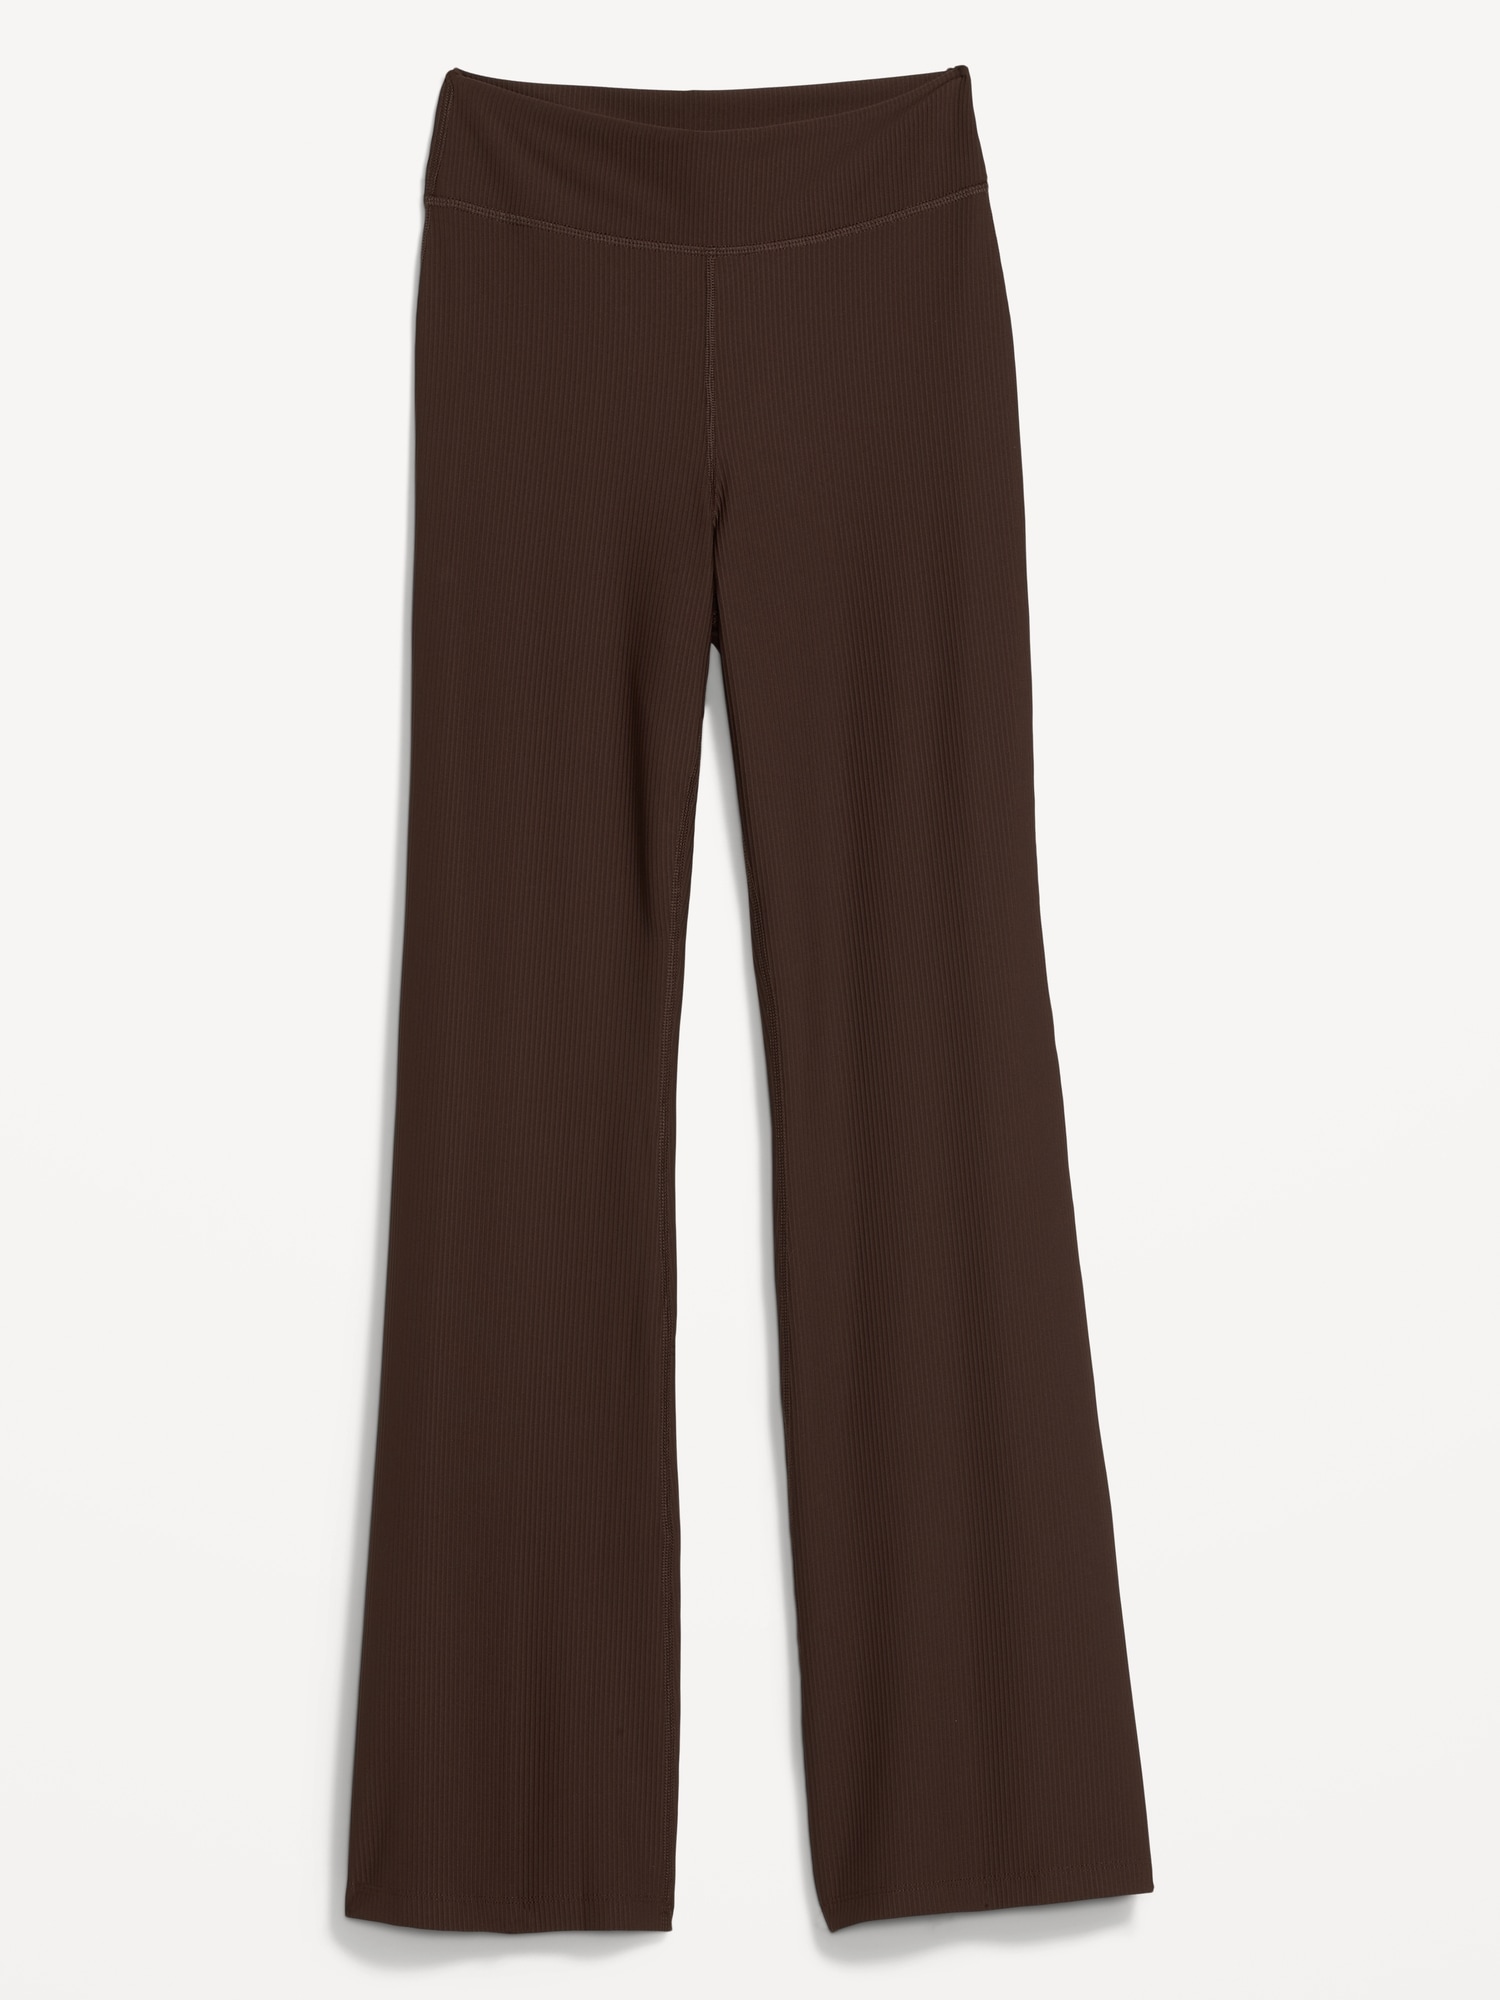 Extra High-Waisted PowerSoft Rib-Knit Flare Pants for Women | Old Navy